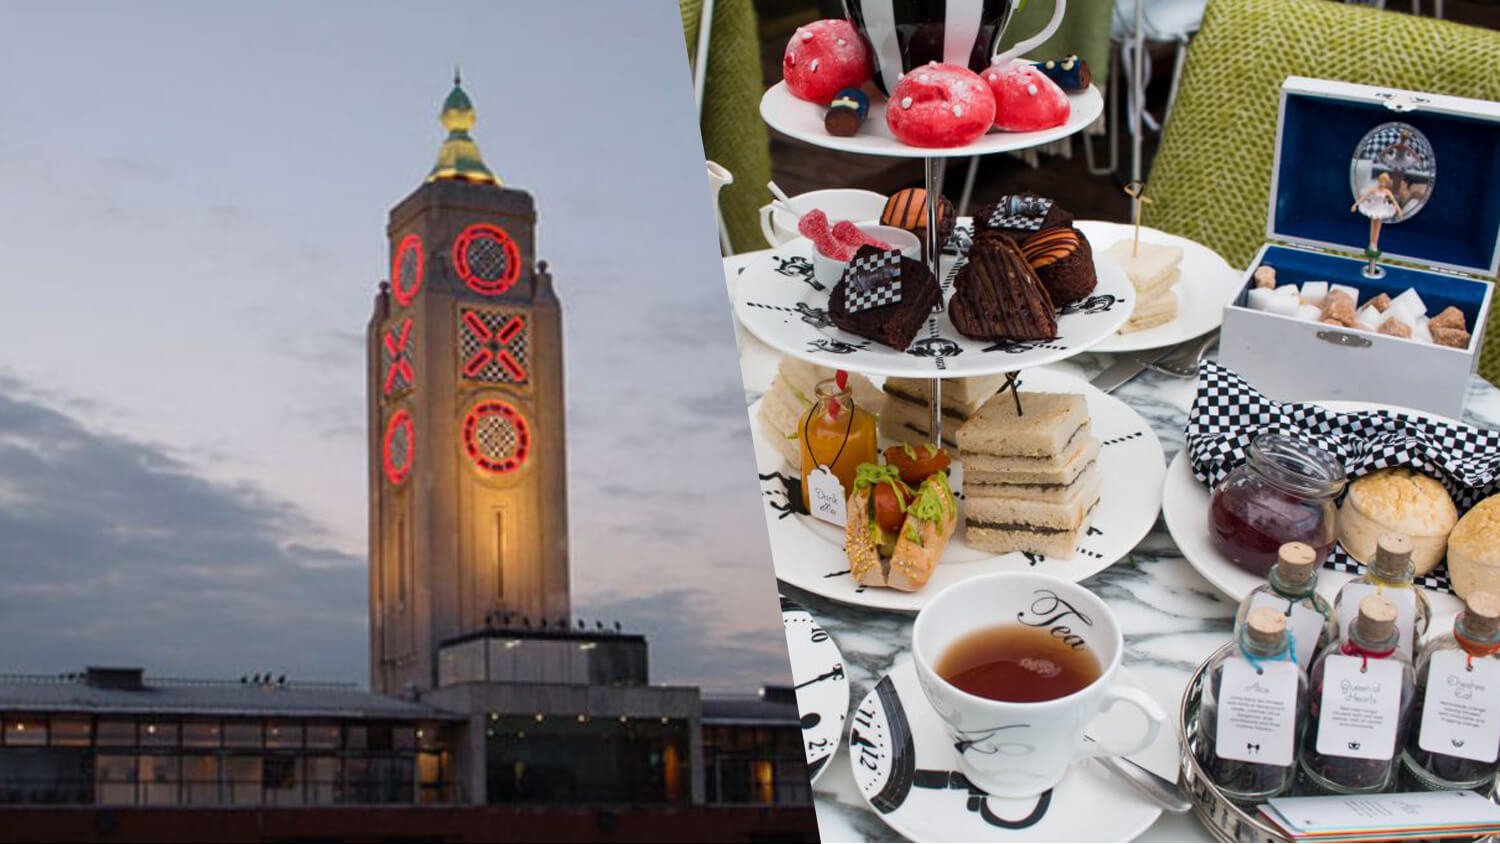 https://s41230.pcdn.co/wp-content/uploads/2018/12/livekindly_oxo_tower_afternoon_tea.jpg